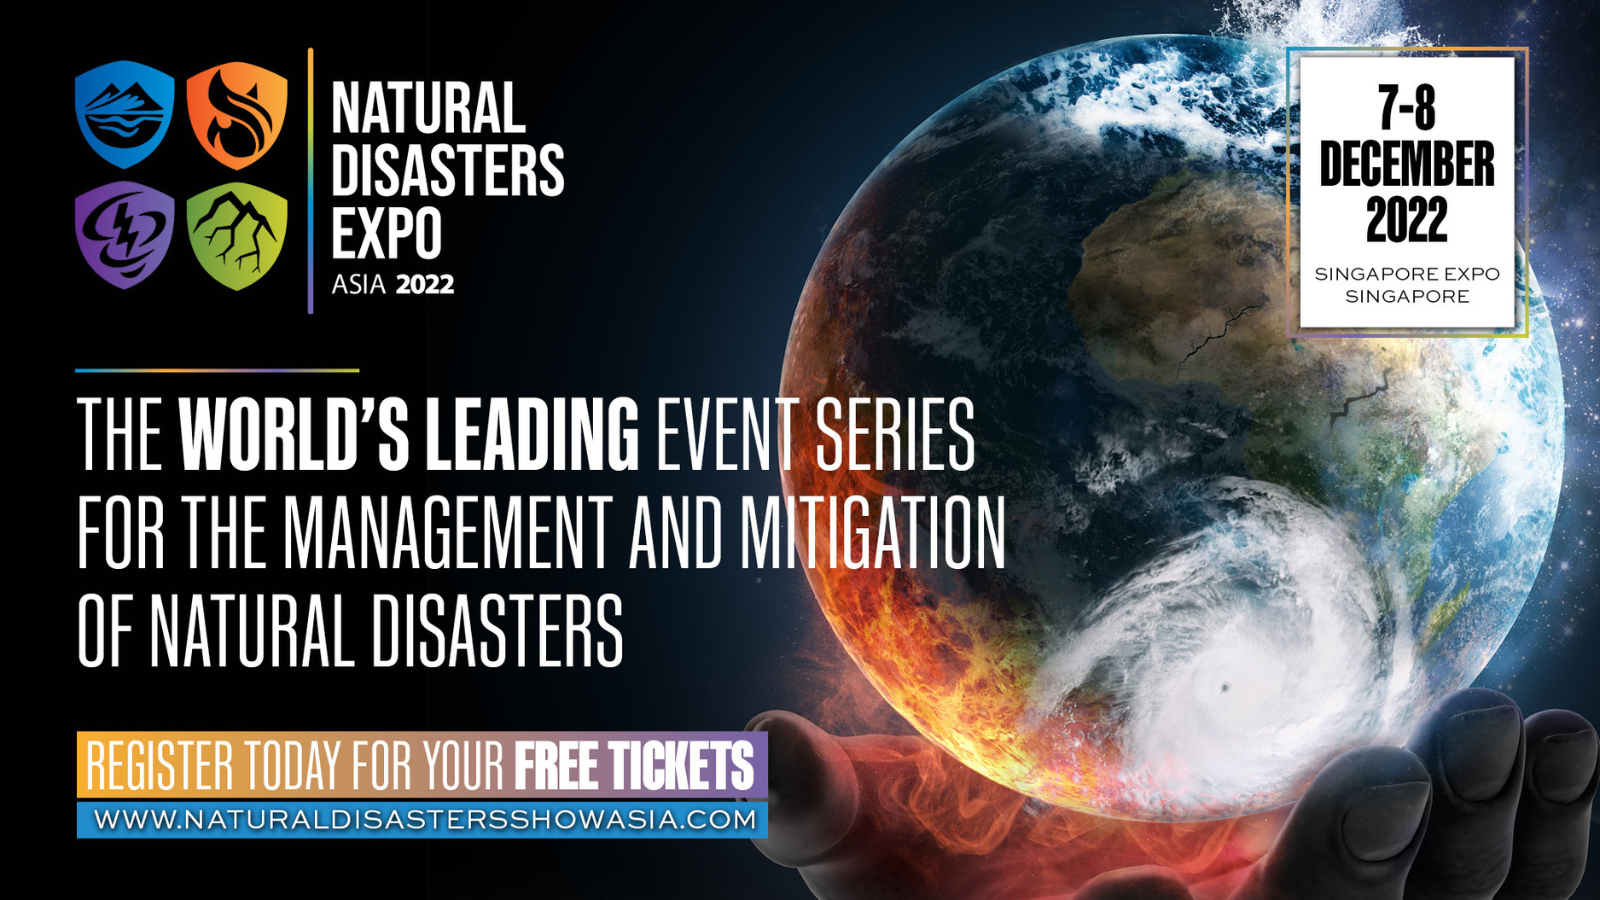 NATURAL DISASTER EXPO ASIA 2022